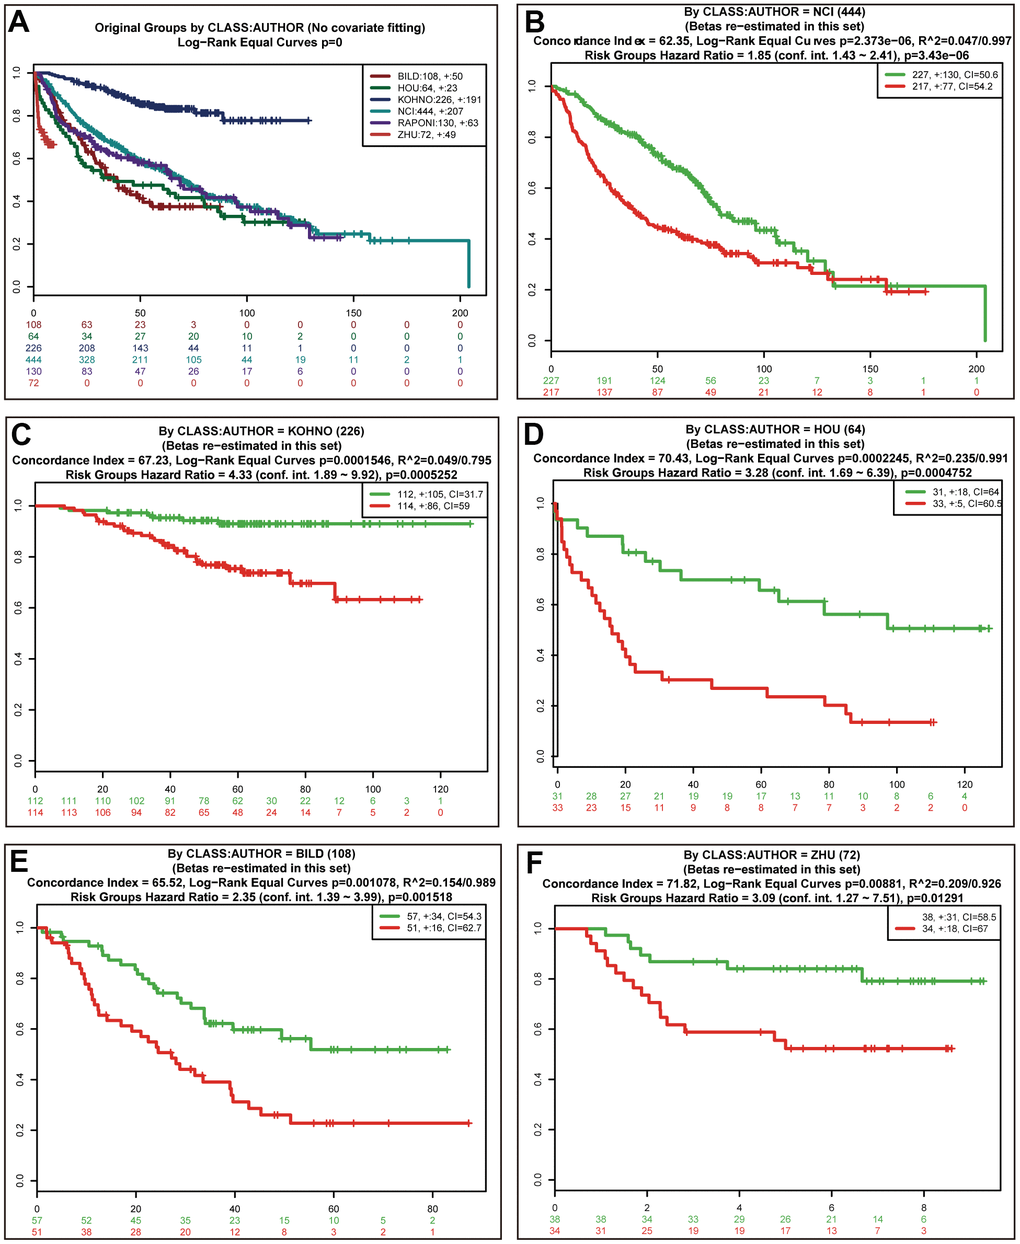 Validation of the prognostic power of risk scores in the independent lung cancer cohorts. Kaplan-Meier survival curves of 6 independent lung cancer cohorts (A). Performance of risk scores in the NCI (B), KOHNO (C), HOU (D), BILD (E), and ZHU (F) cohorts.